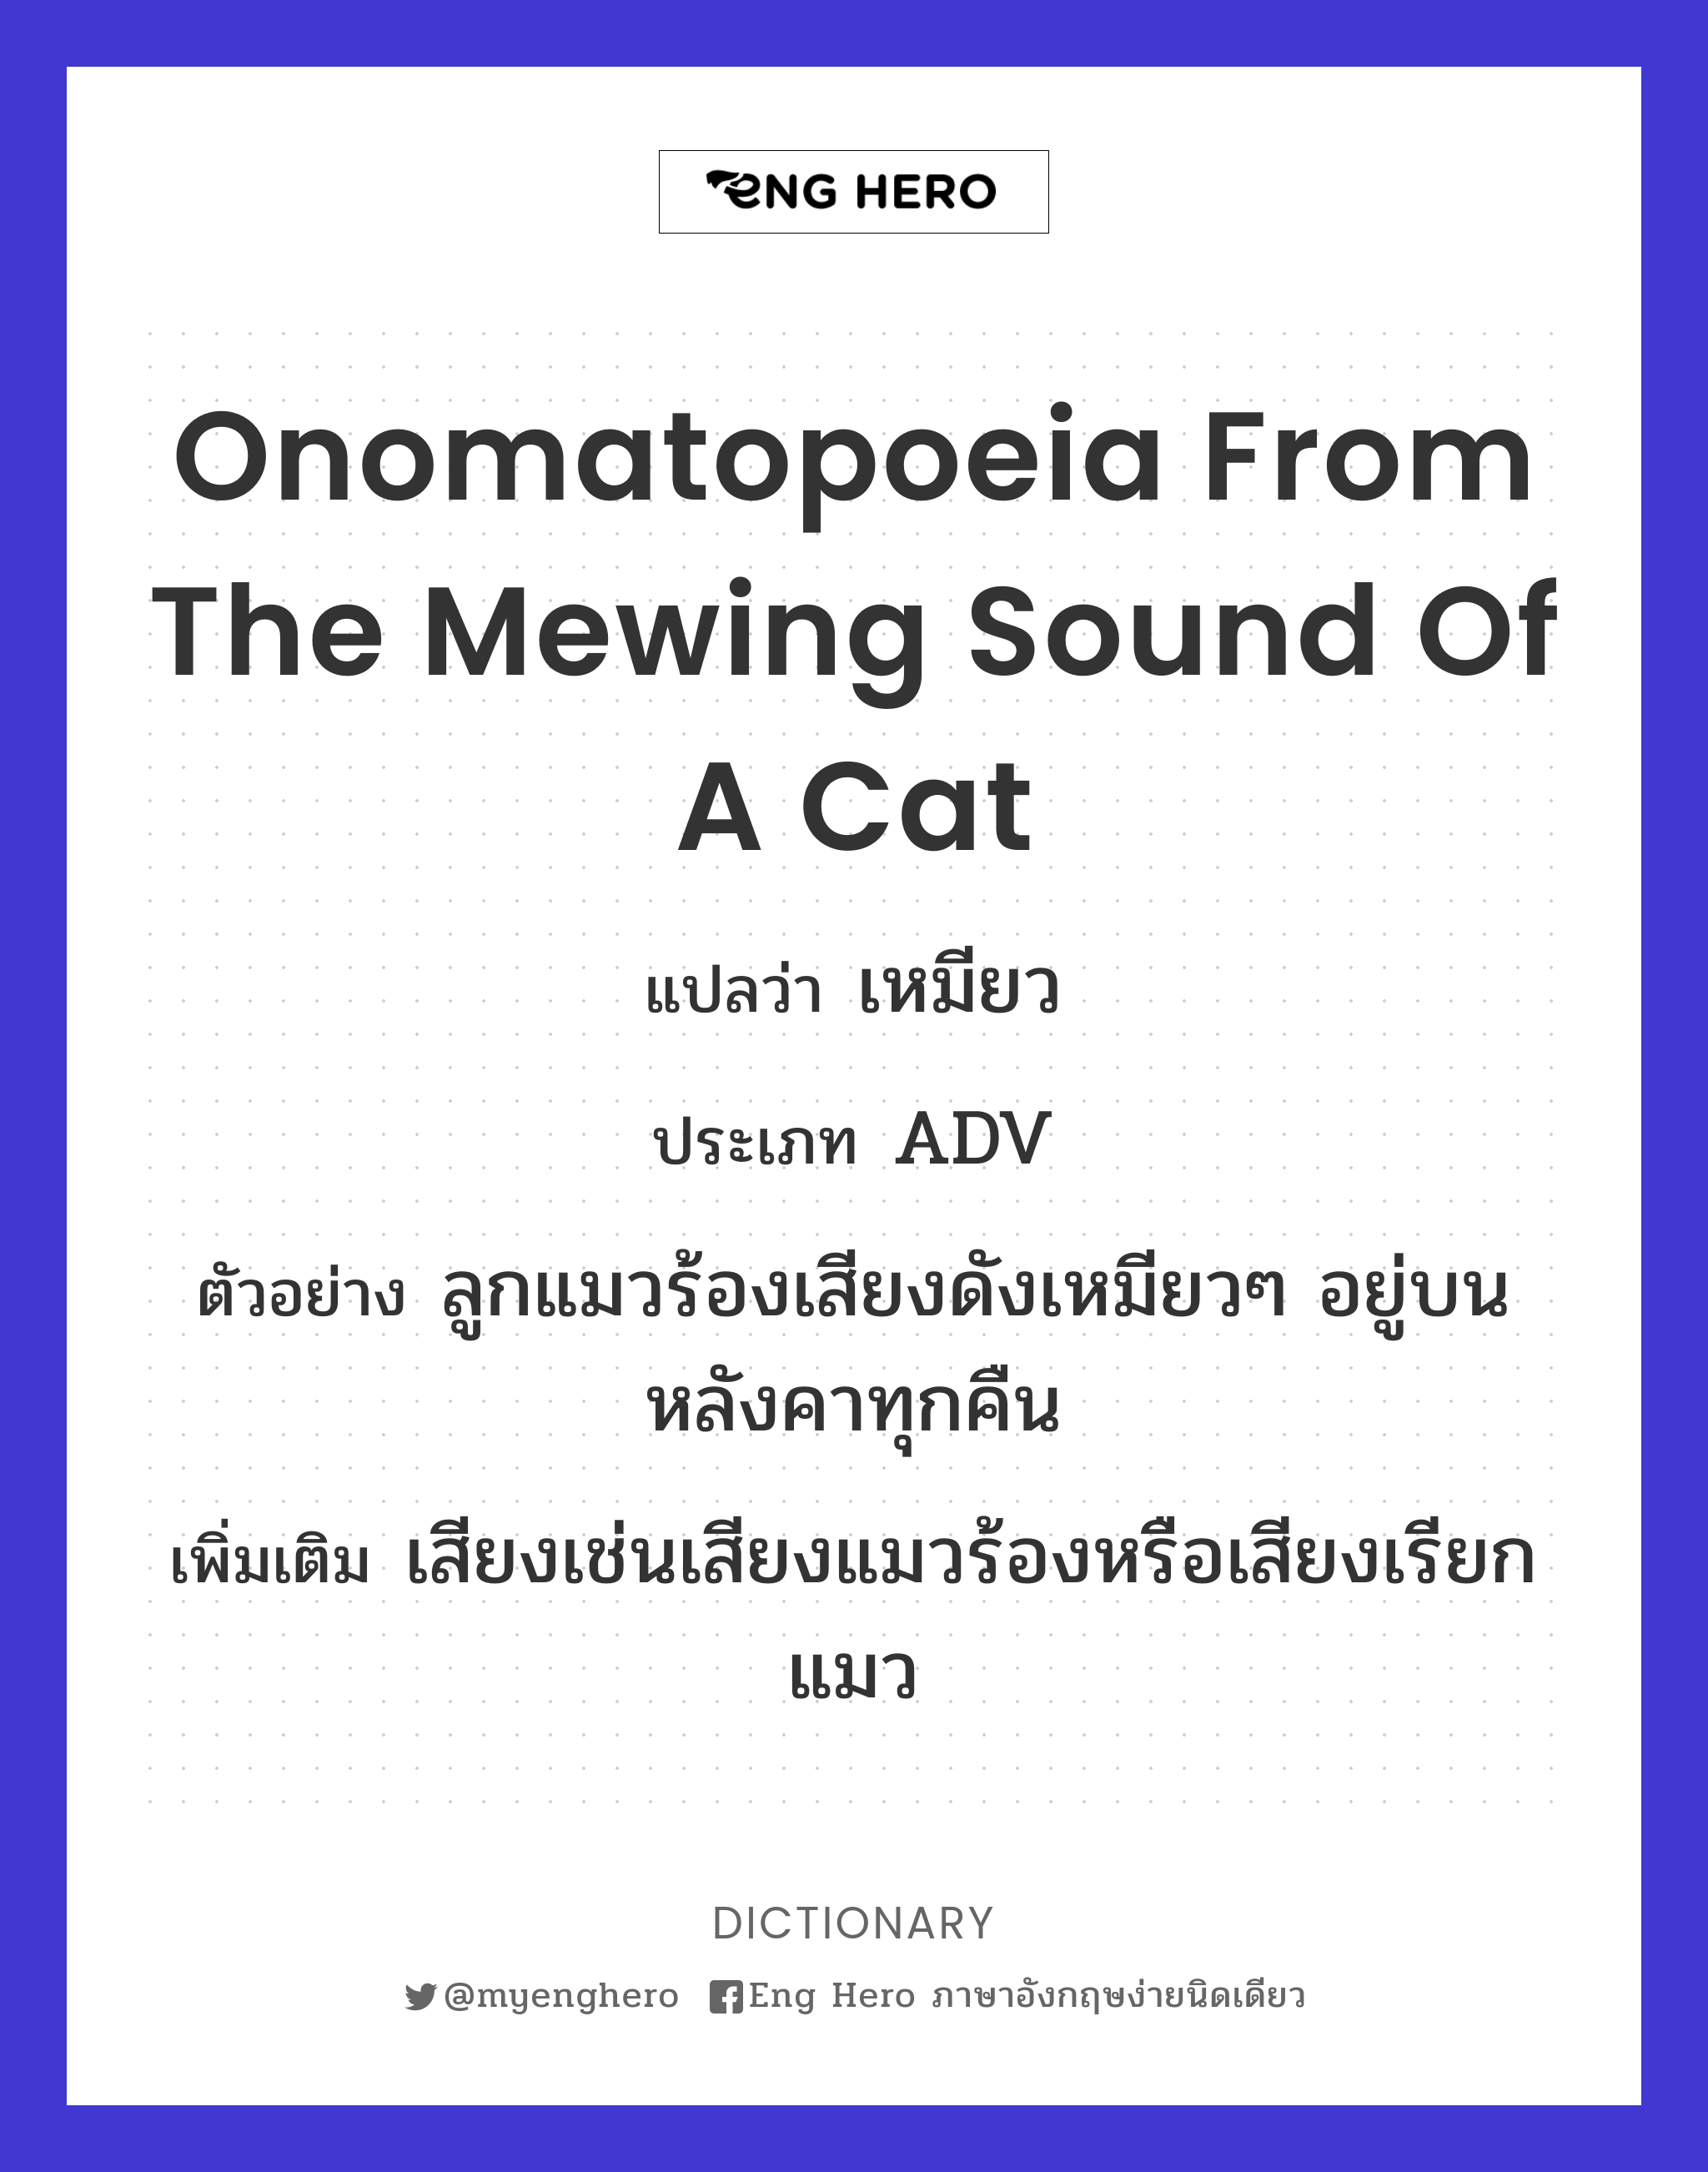 onomatopoeia from the mewing sound of a cat